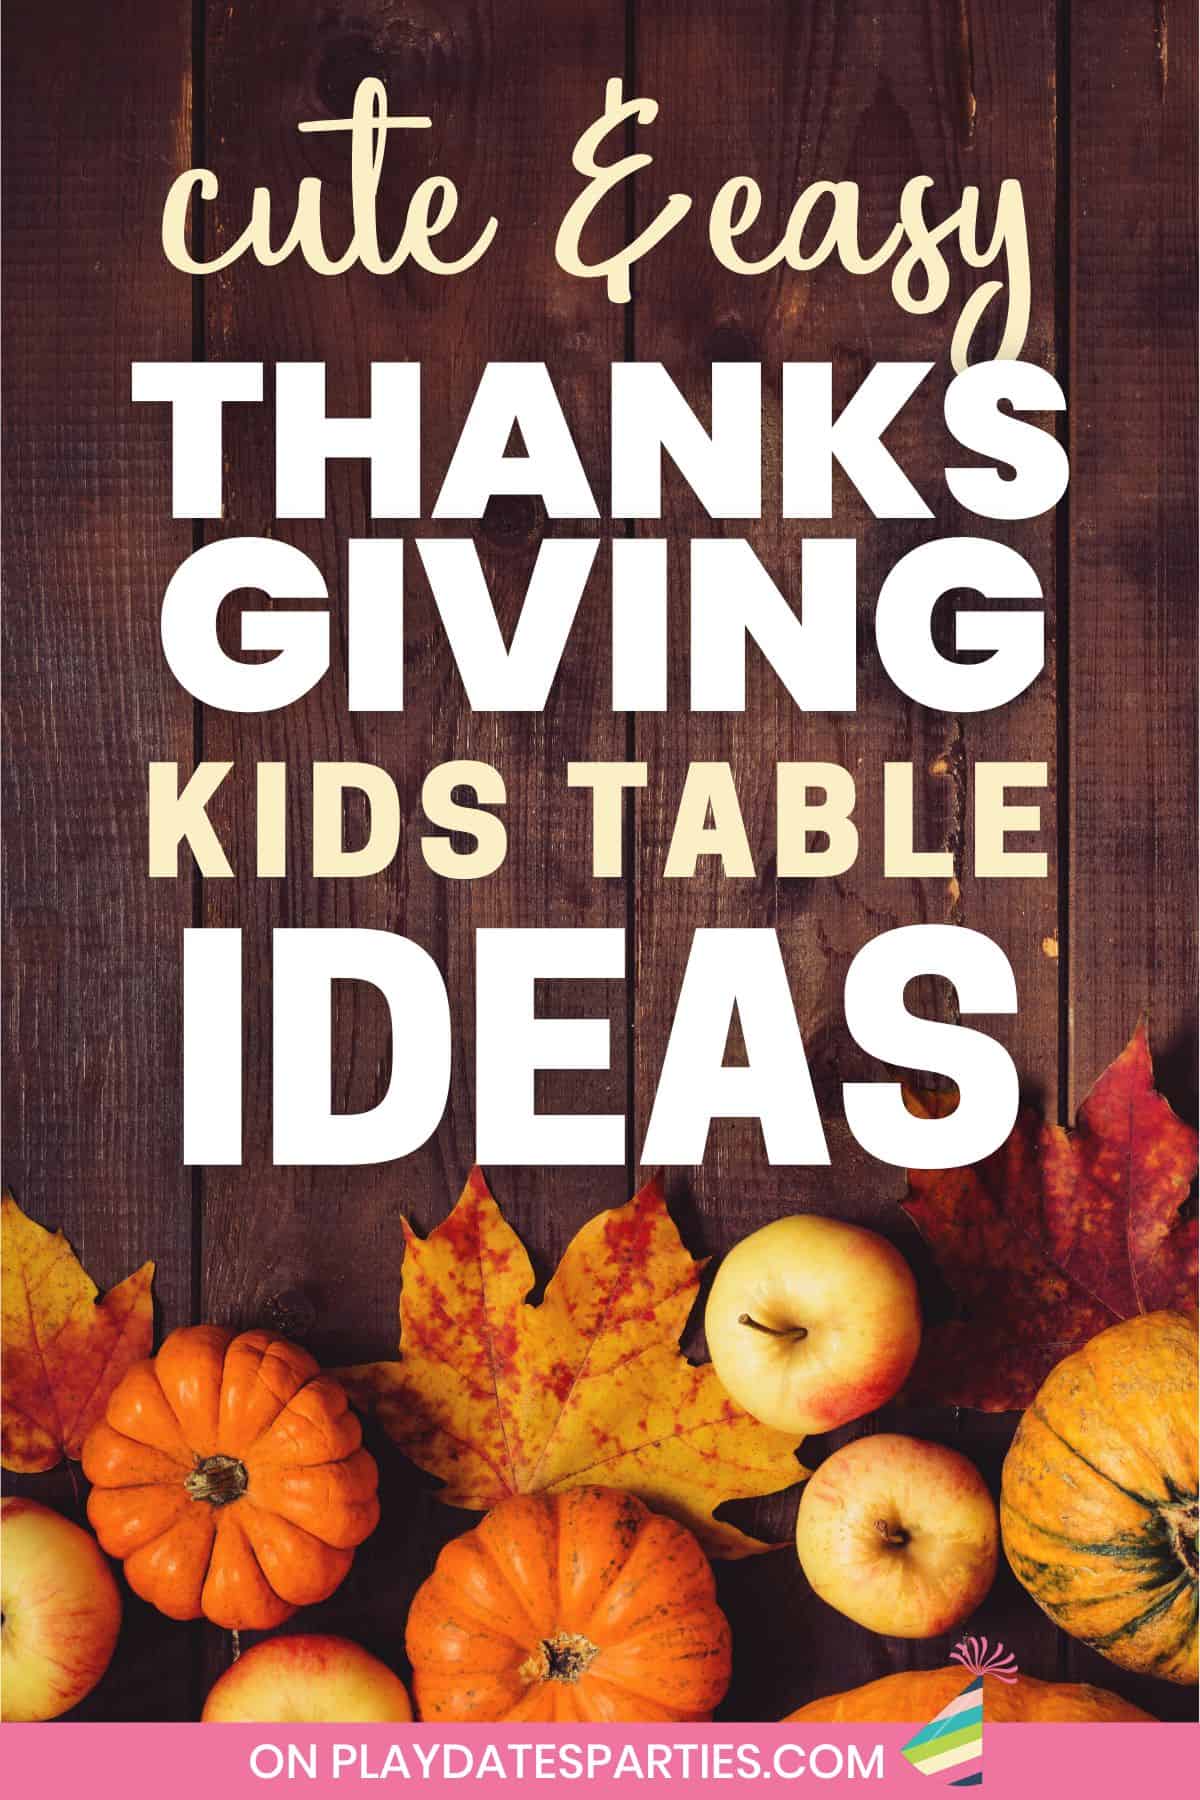 Wood table with pumpkins and fall leaves with text cute and easy Thanksgiving kids table ideas.